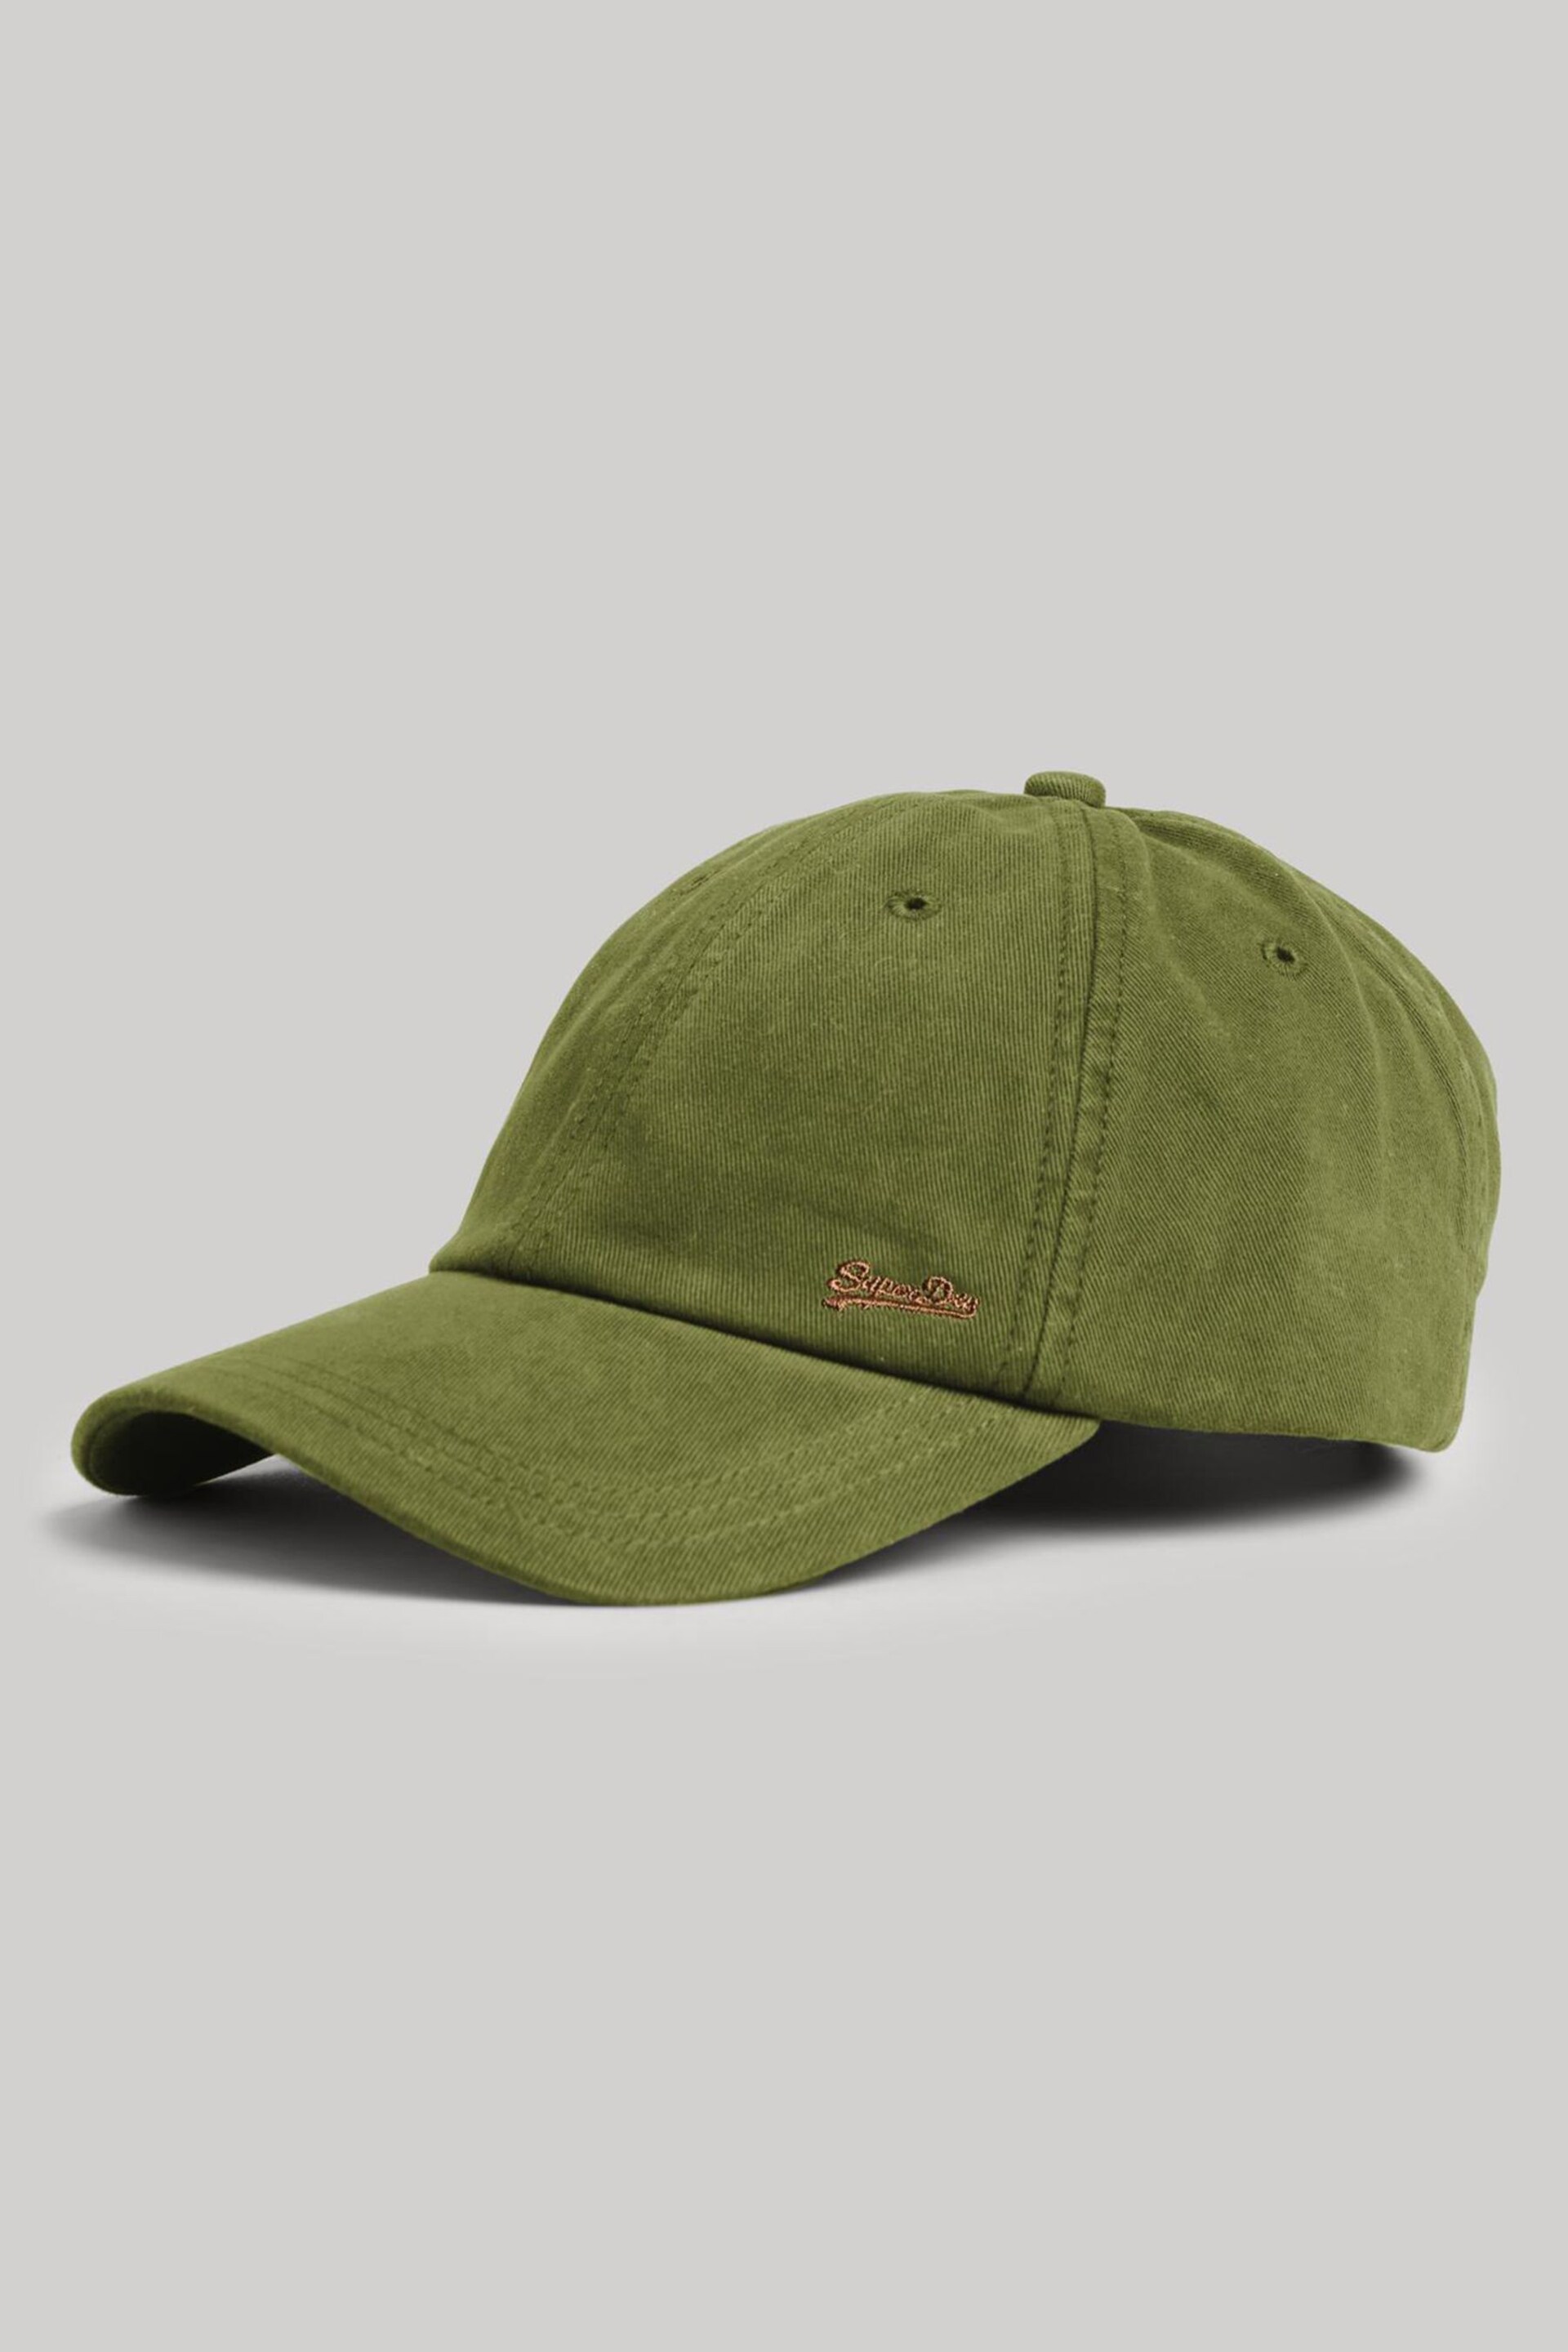 Superdry Green Vintage Embroidered Cap - Image 1 of 4